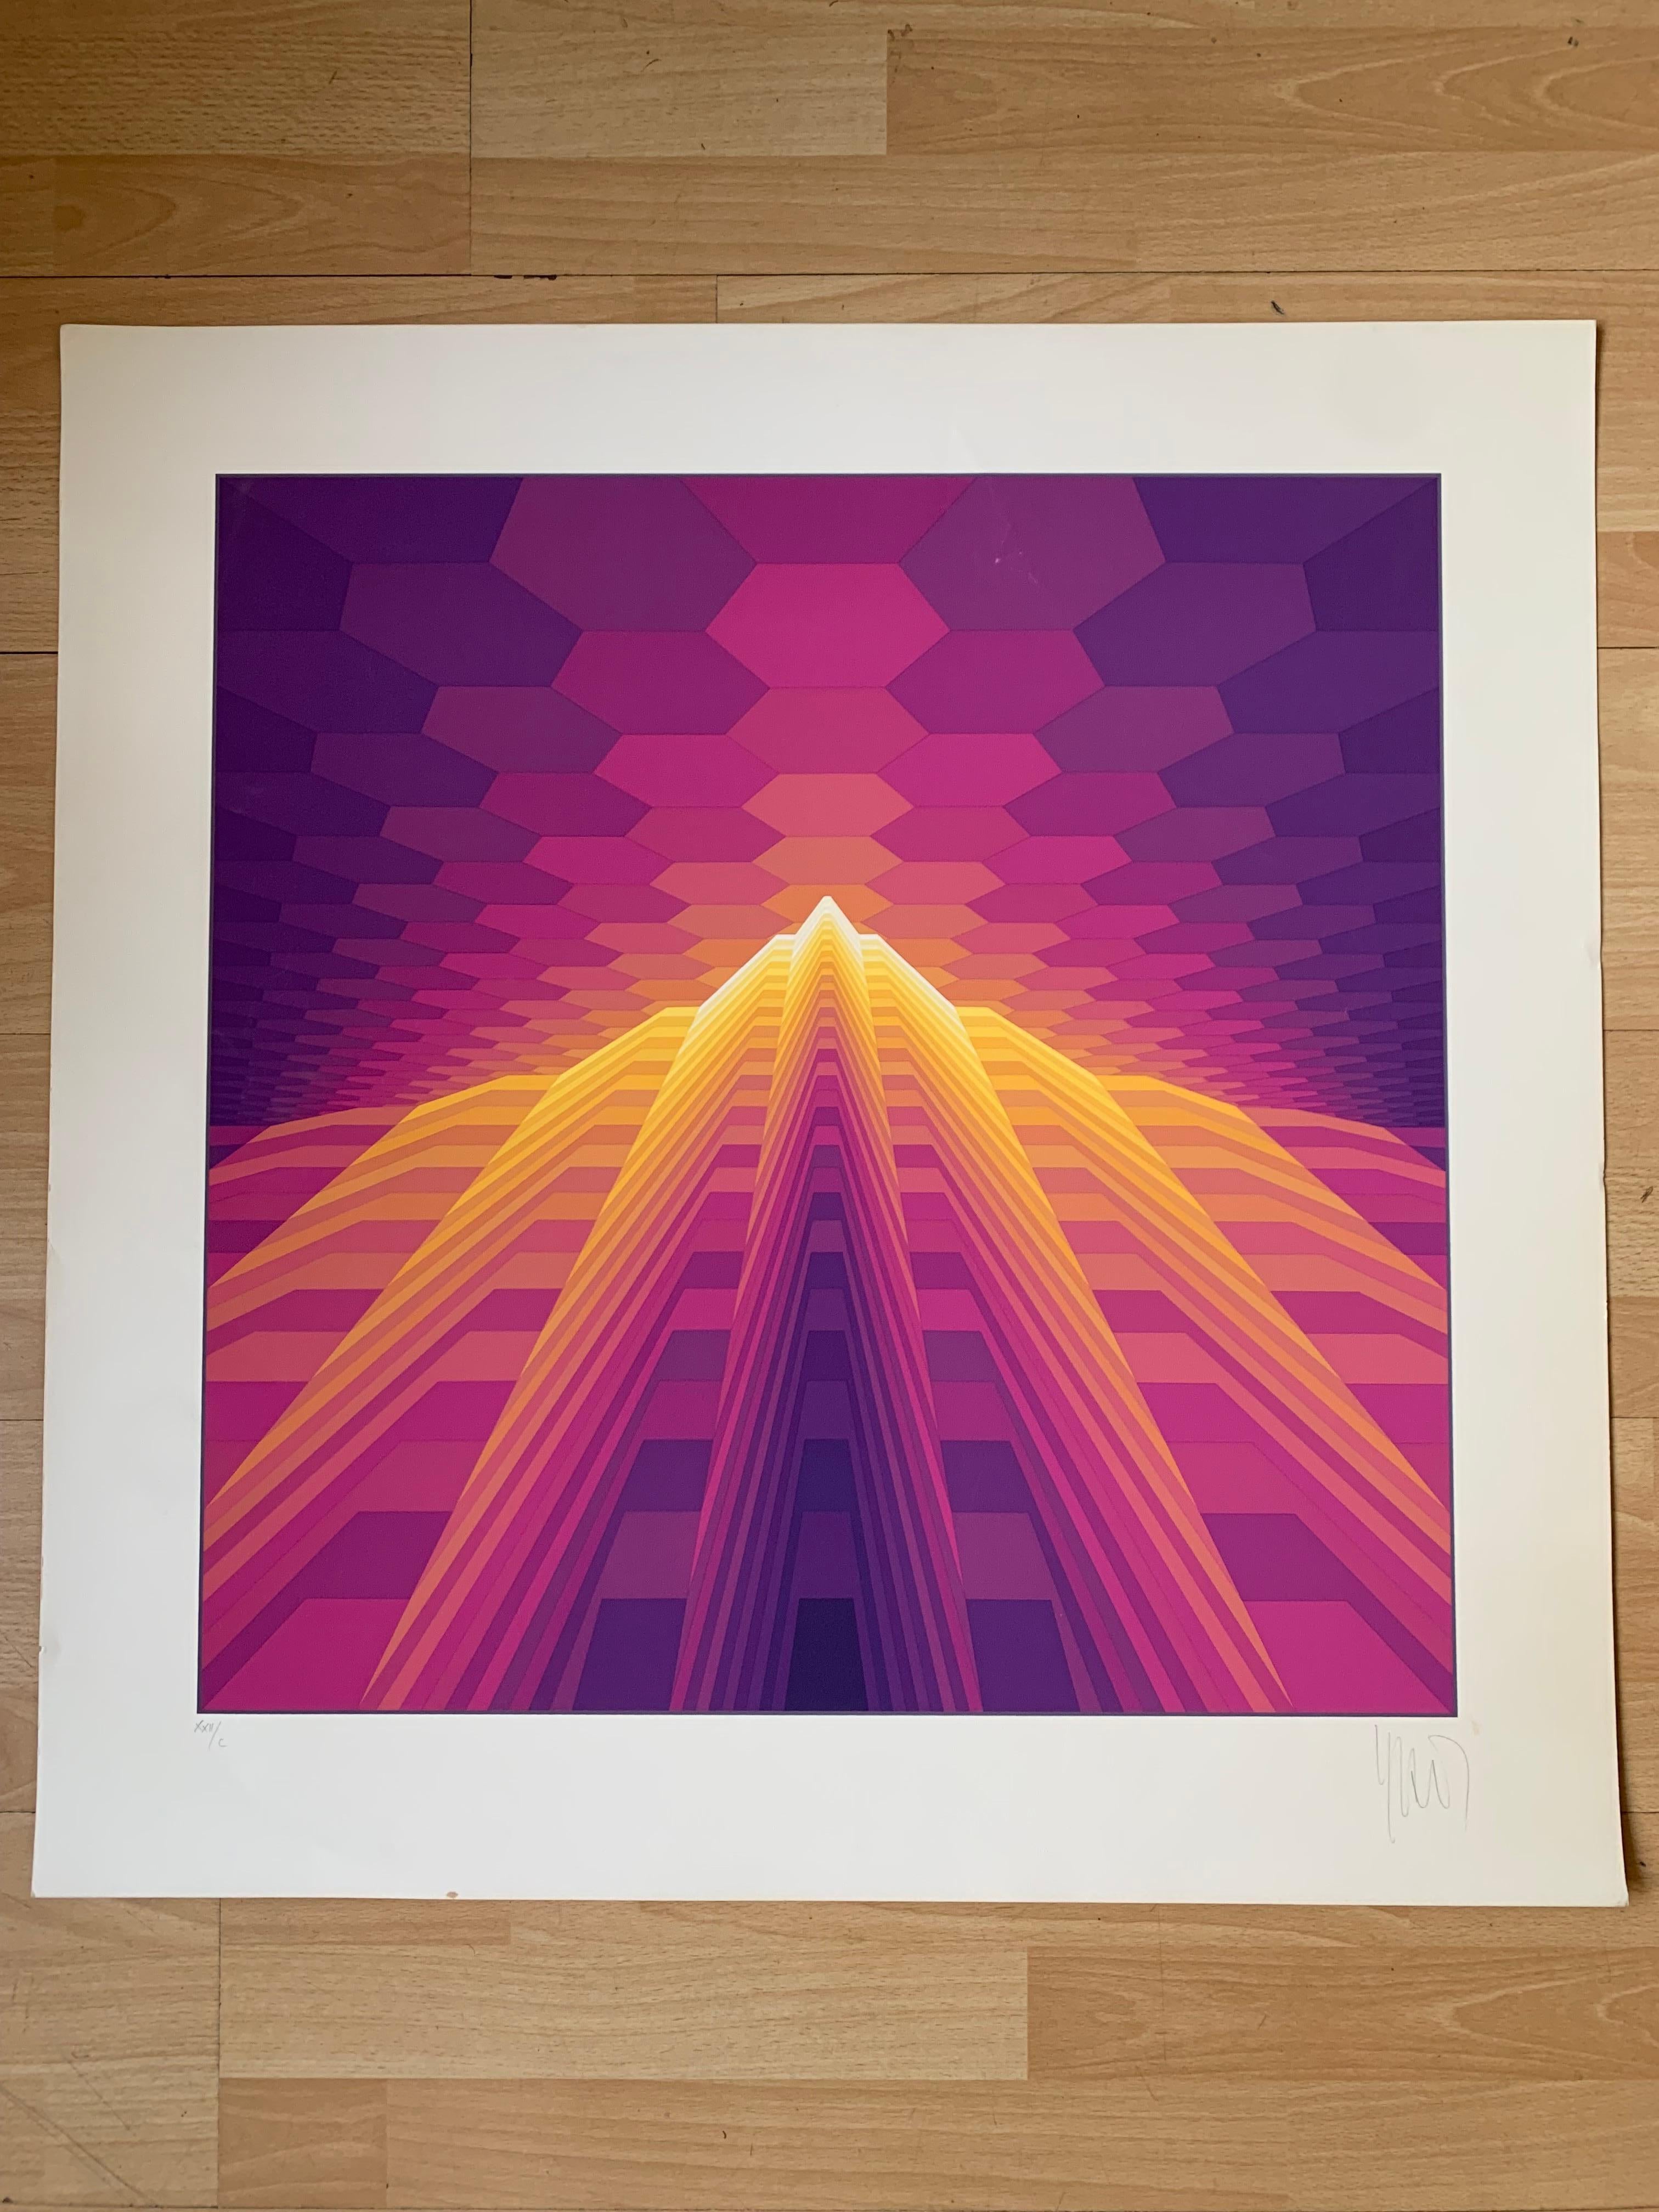 Lithographie Yvaral (Jean-Pierre Vasarely)  - 1978